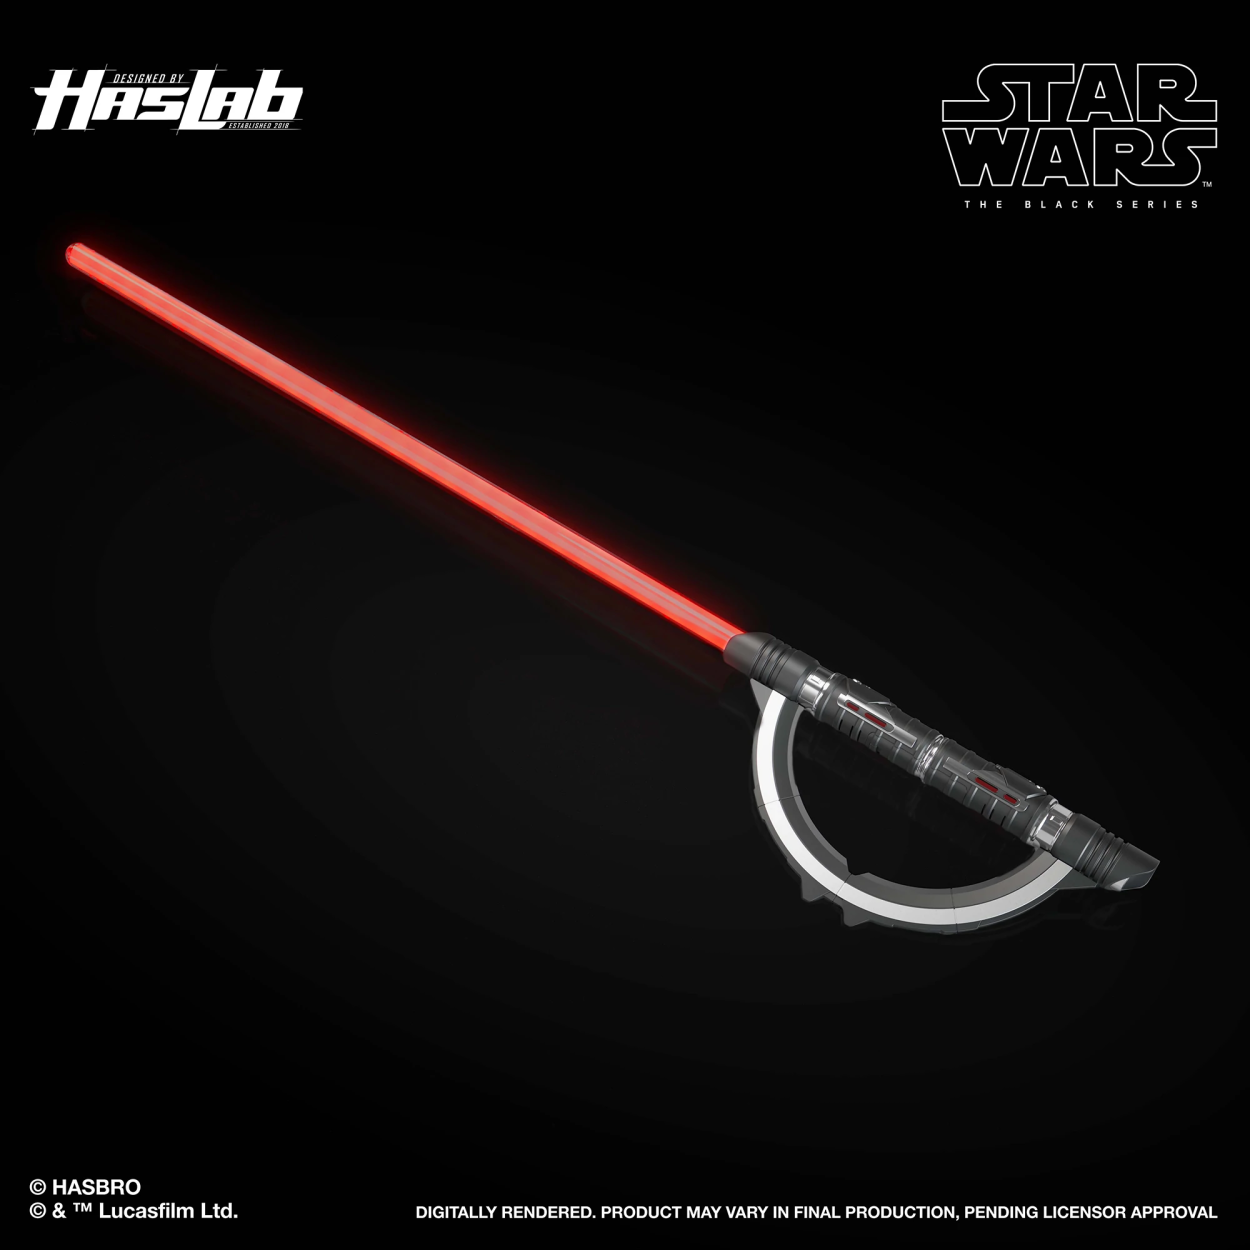 https://www.starwars-universe.com/images/collection/databank/fabricants/hasbro/theblackseries-wearable/weapons/haslab-reva-ligthsaber/reva-ls-02.png